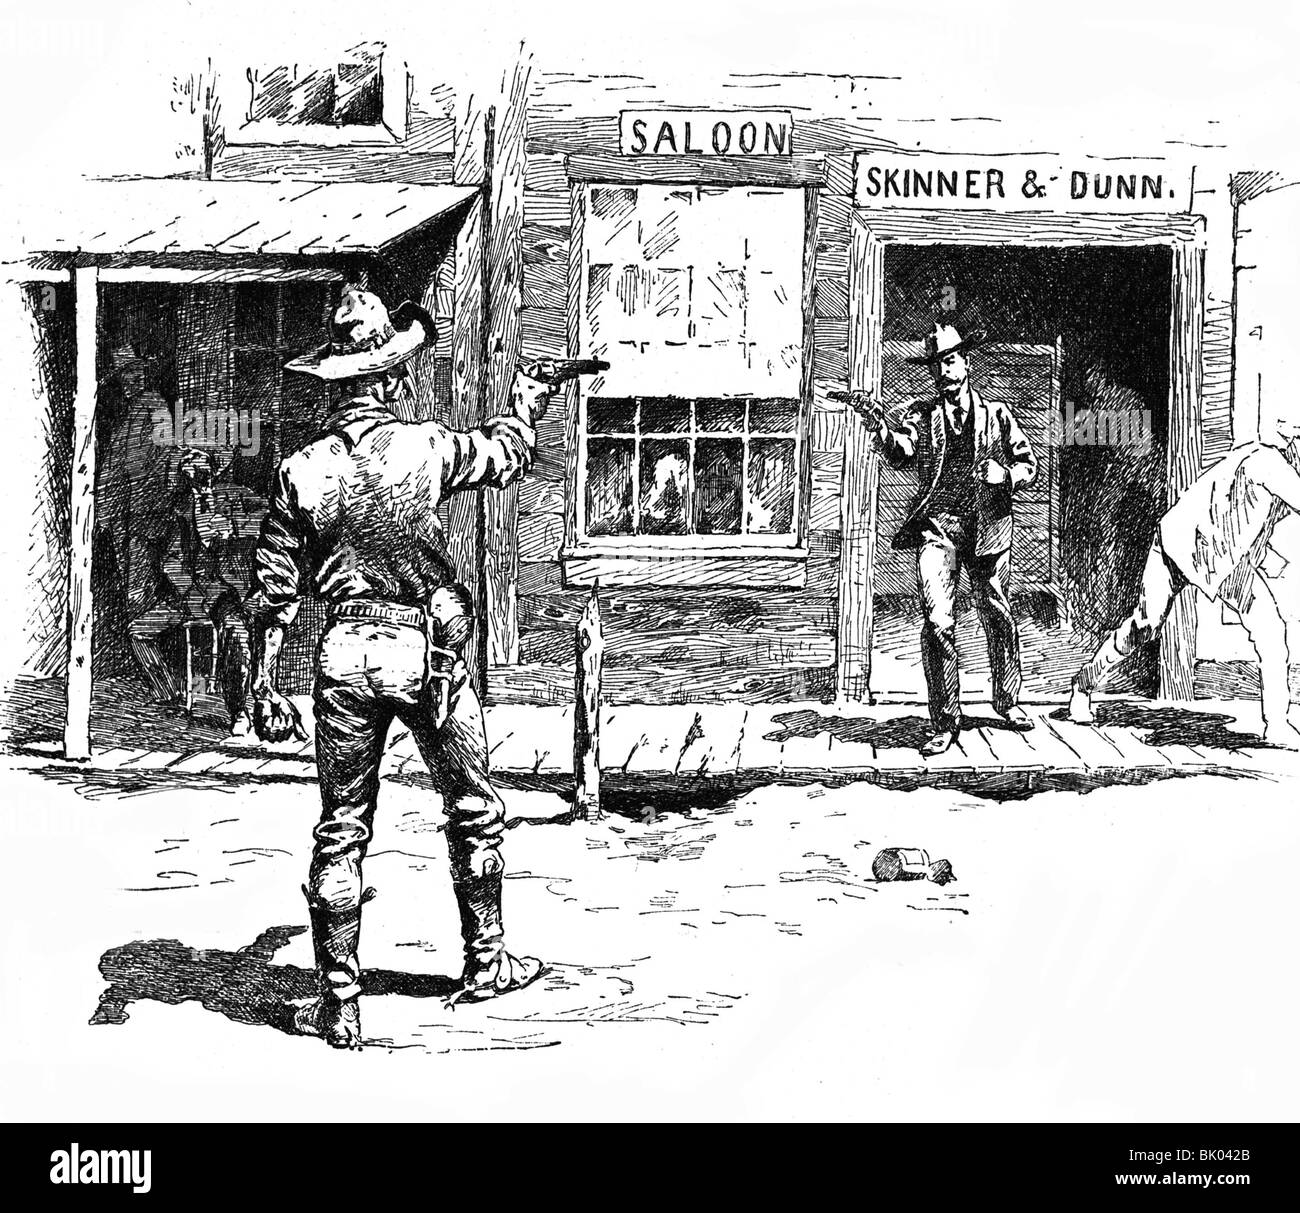 geography / travel, United States of America, people, cowboys, duell on street, wood engraving after painting by Frederick, 19th century, historic, historical, saloon, skinner, dunn, shoot-out, revolver, shoot, gunfight, gunfights, Wild West, fight, fighting, combat, pistol, weapon, gun, North America, Stock Photo